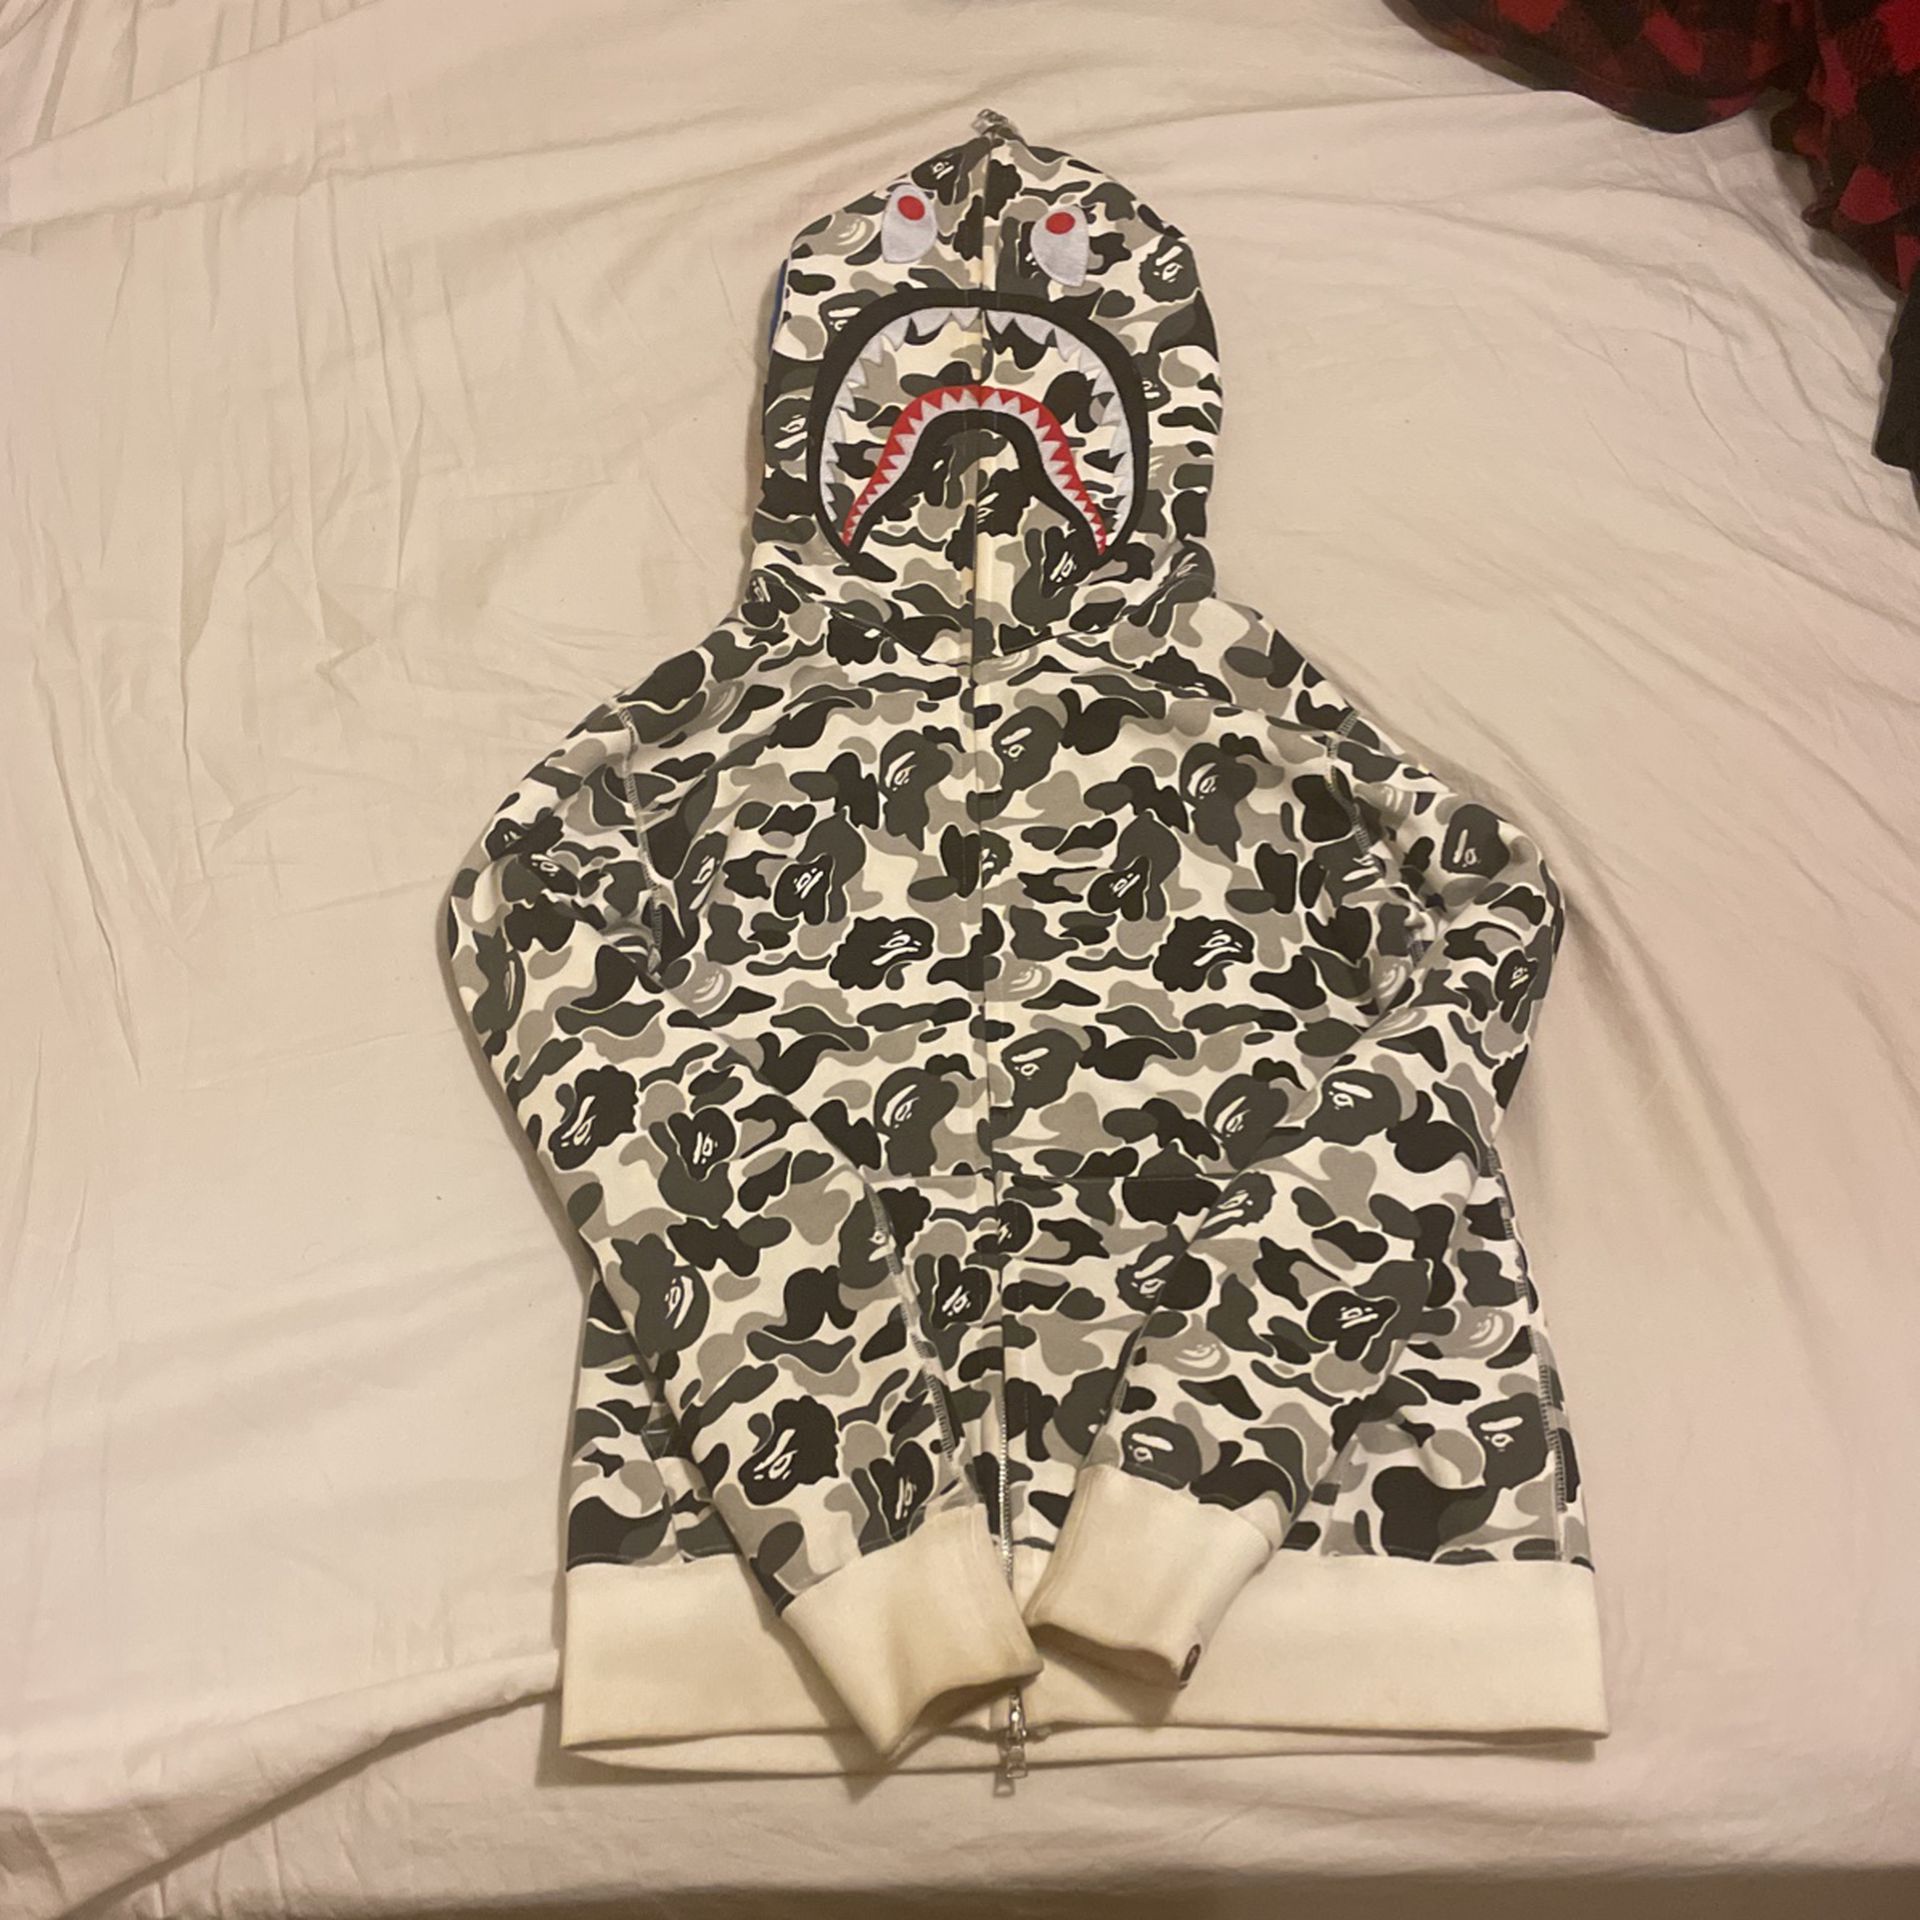 Bape Zip Up Hoodie Size Small